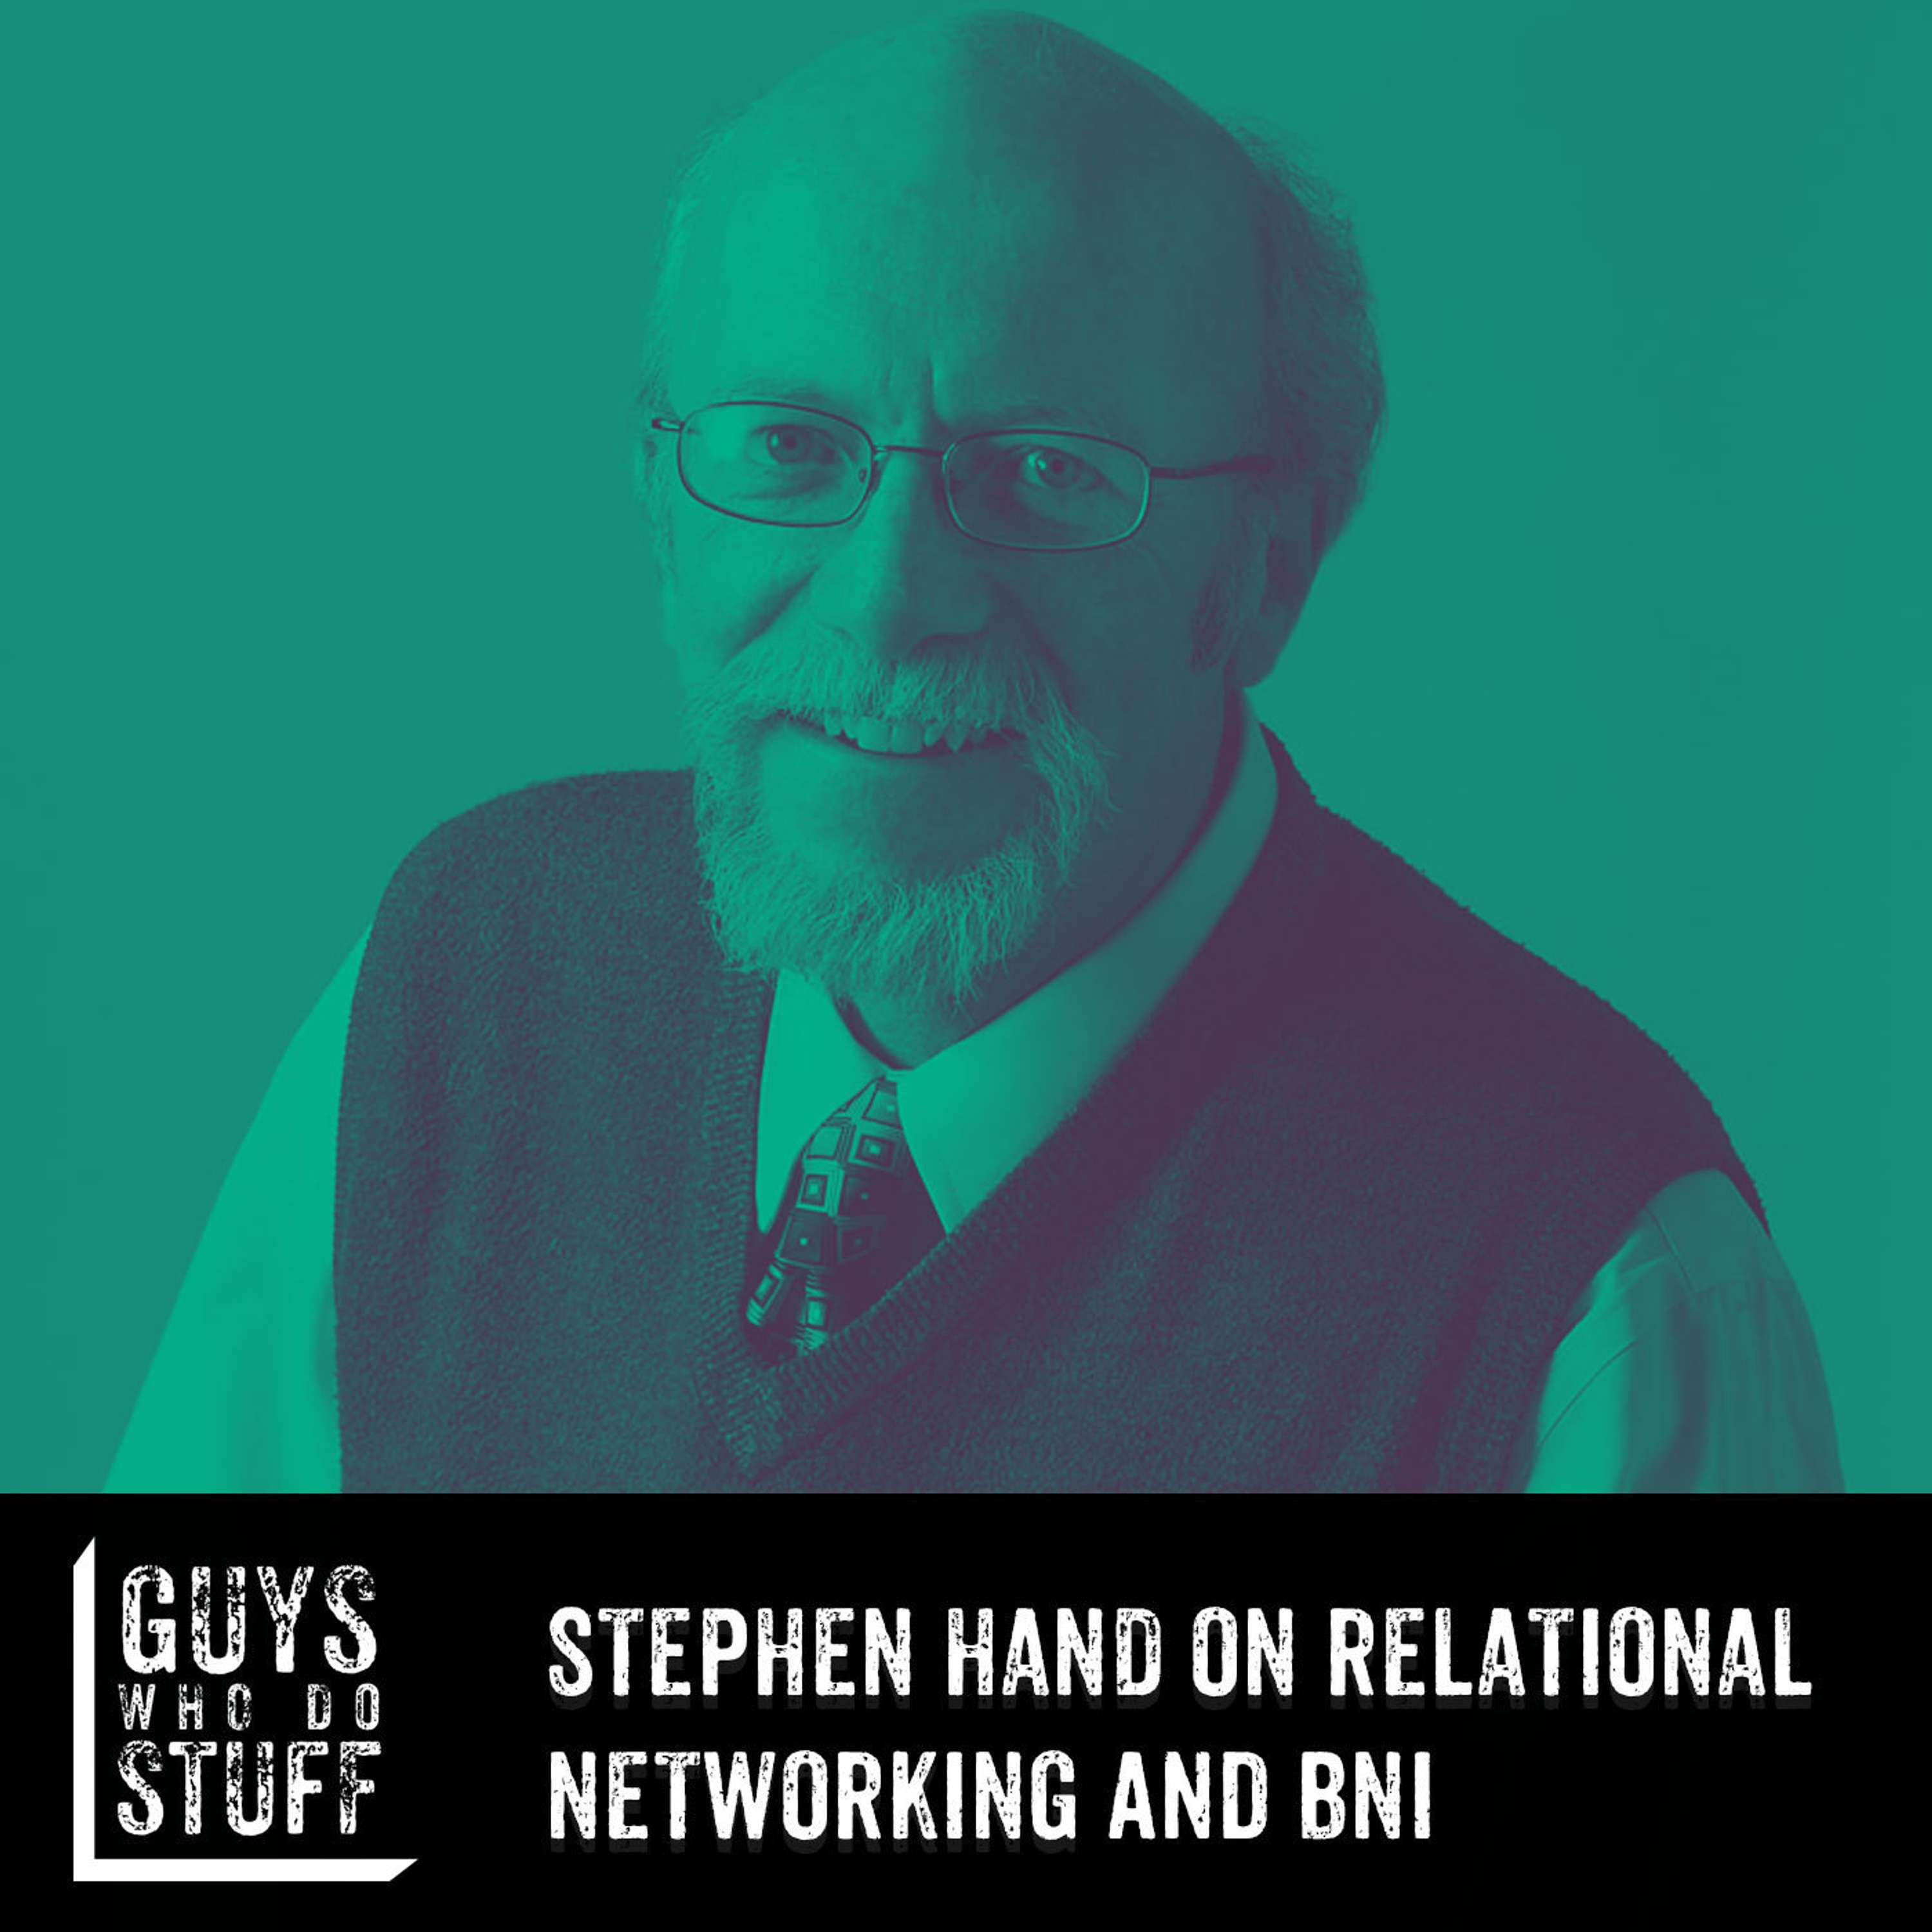 Stephen Hand on Relational Networking and BNI